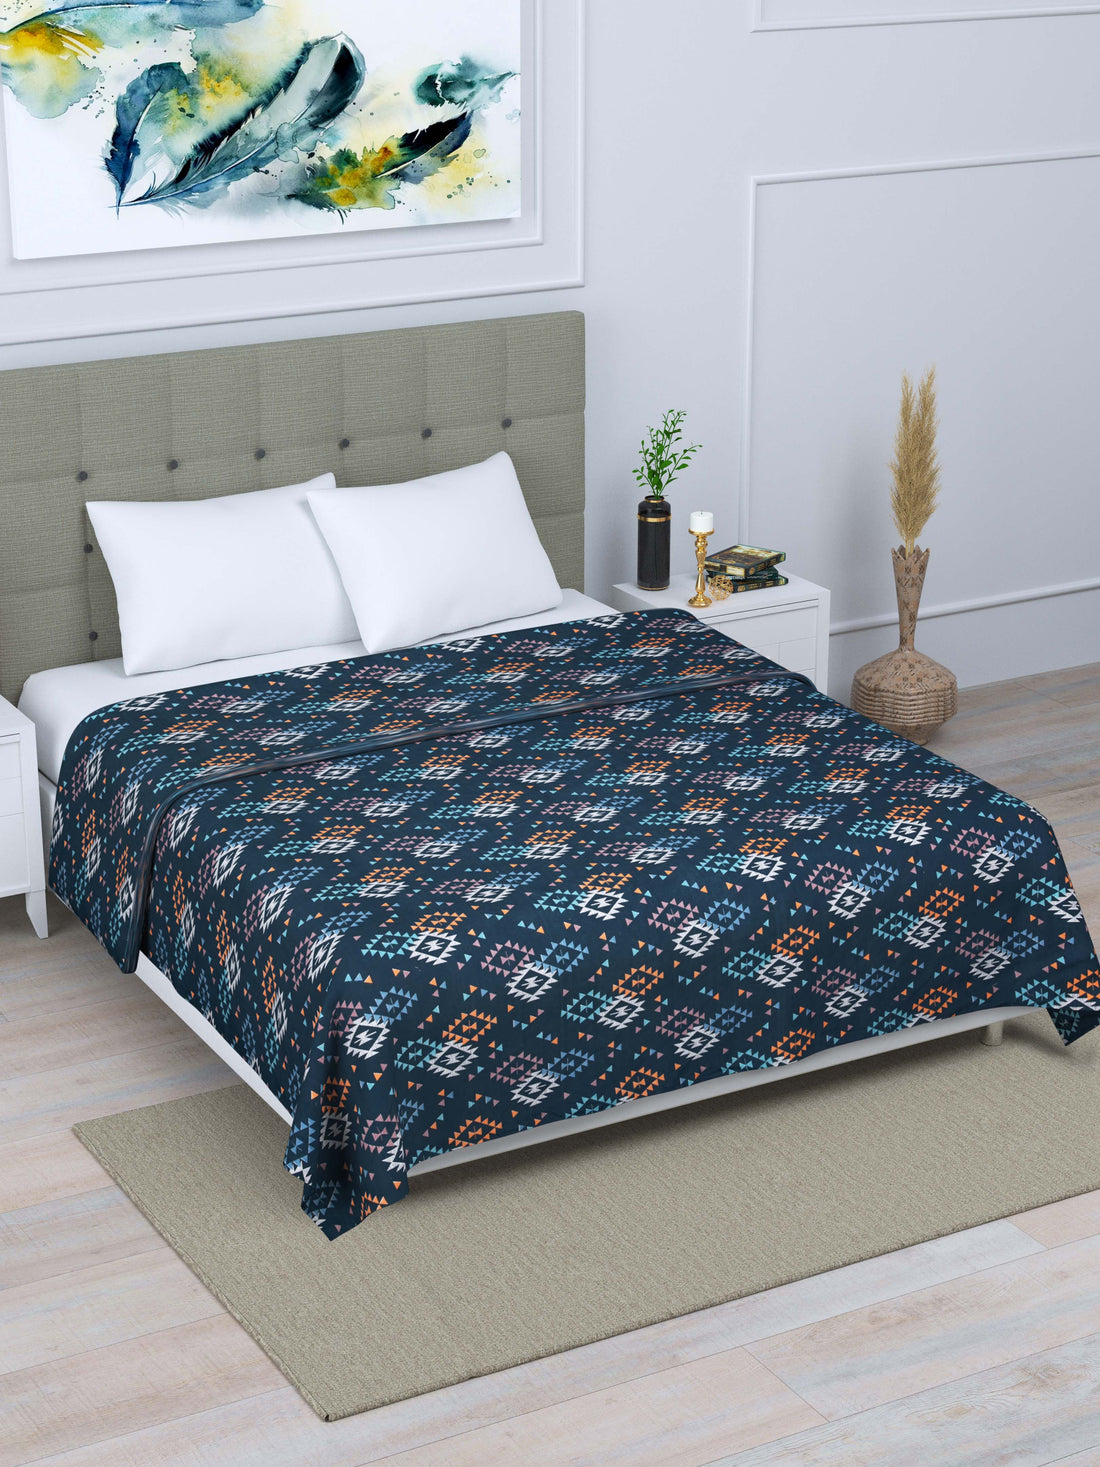 Dohar-Double Bed- Blue Charm